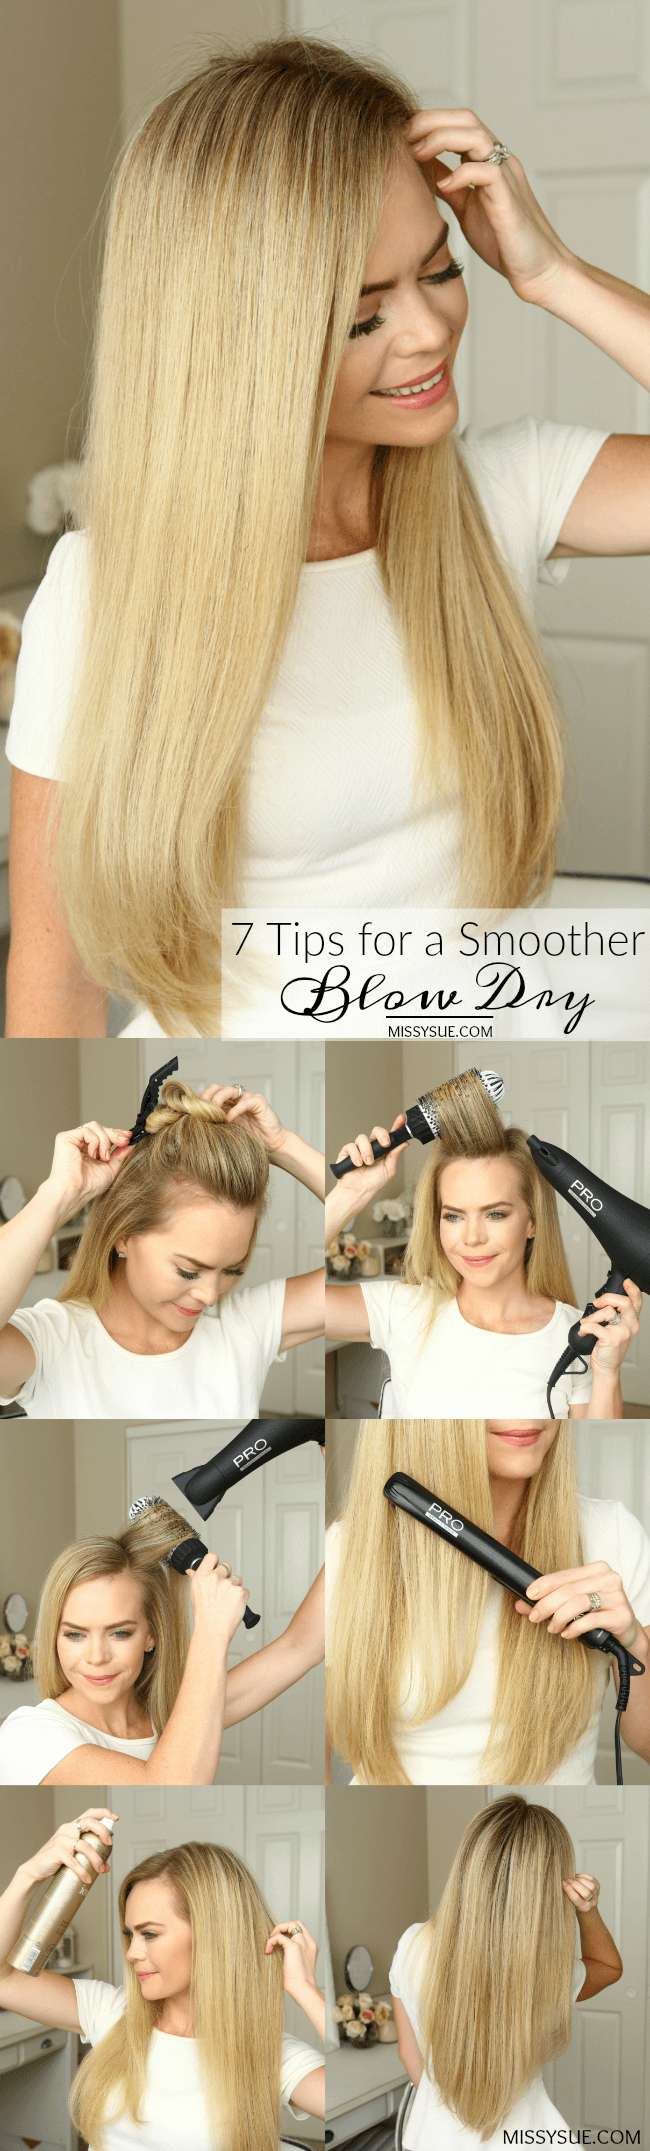 7 Tips for a Smoother Blow Dry | MISSY SUE